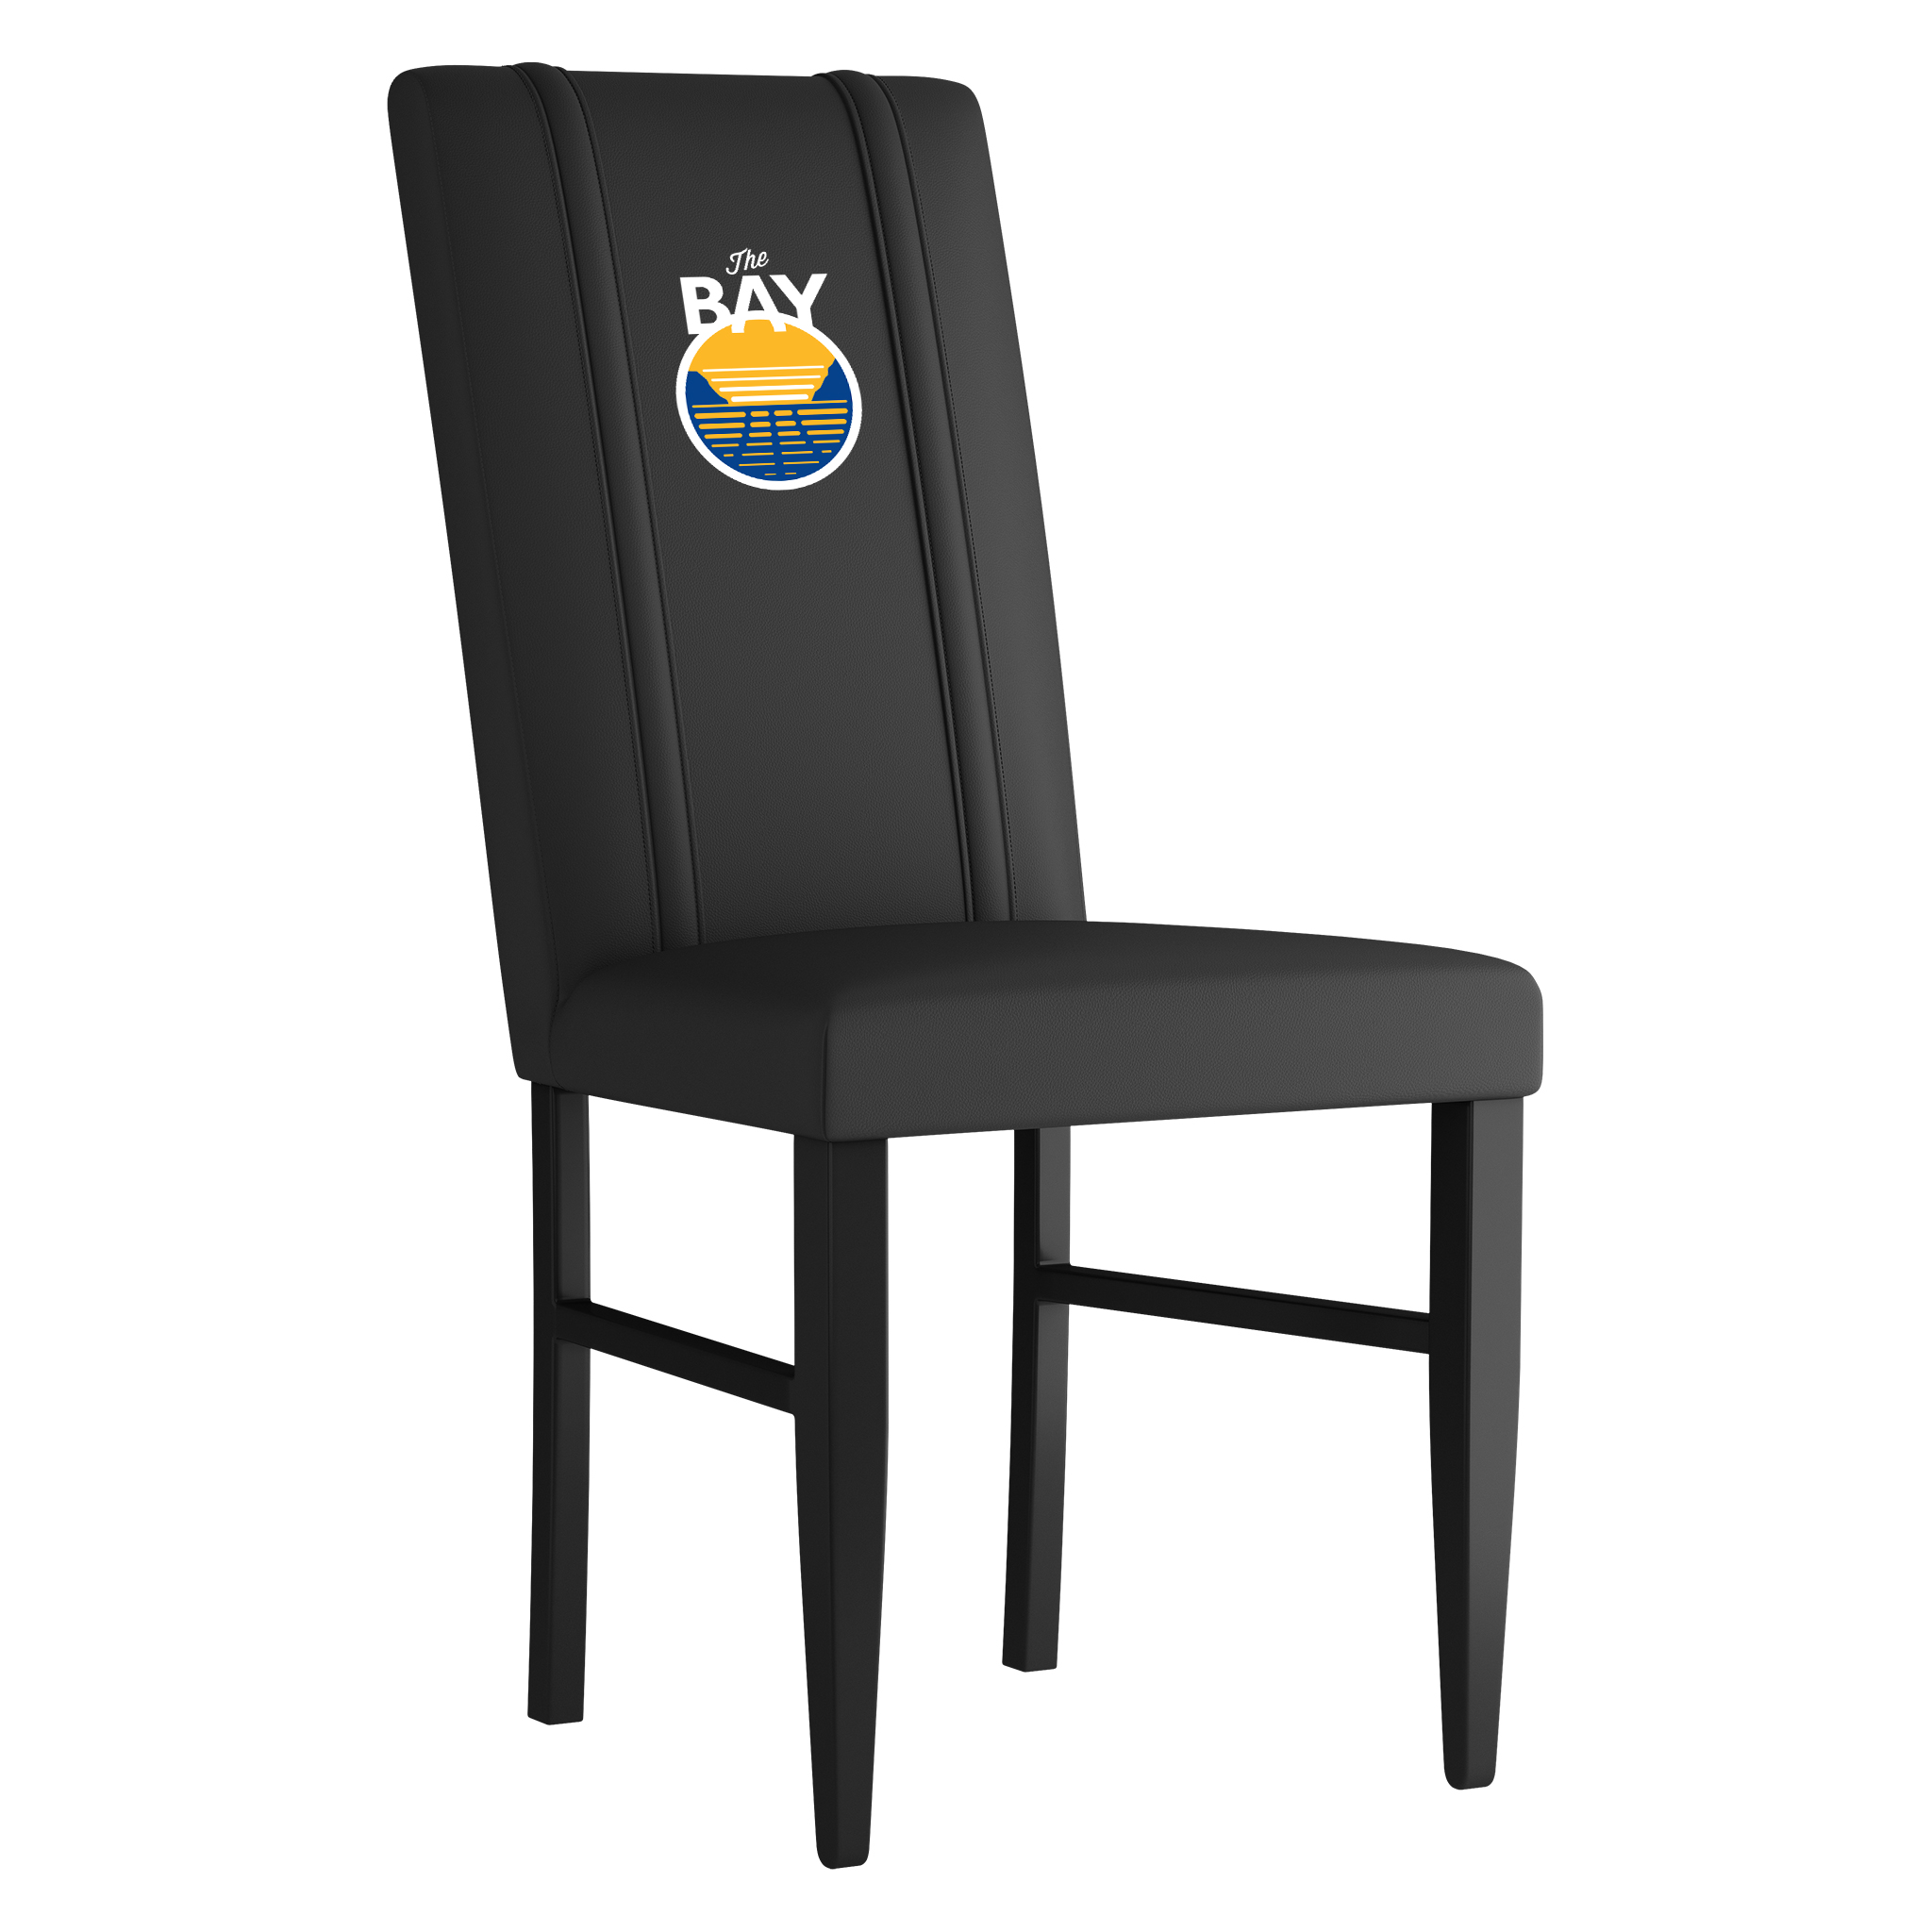 Golden State Warriors Side Chair 2000 With Golden State Warriors Secondary Logo